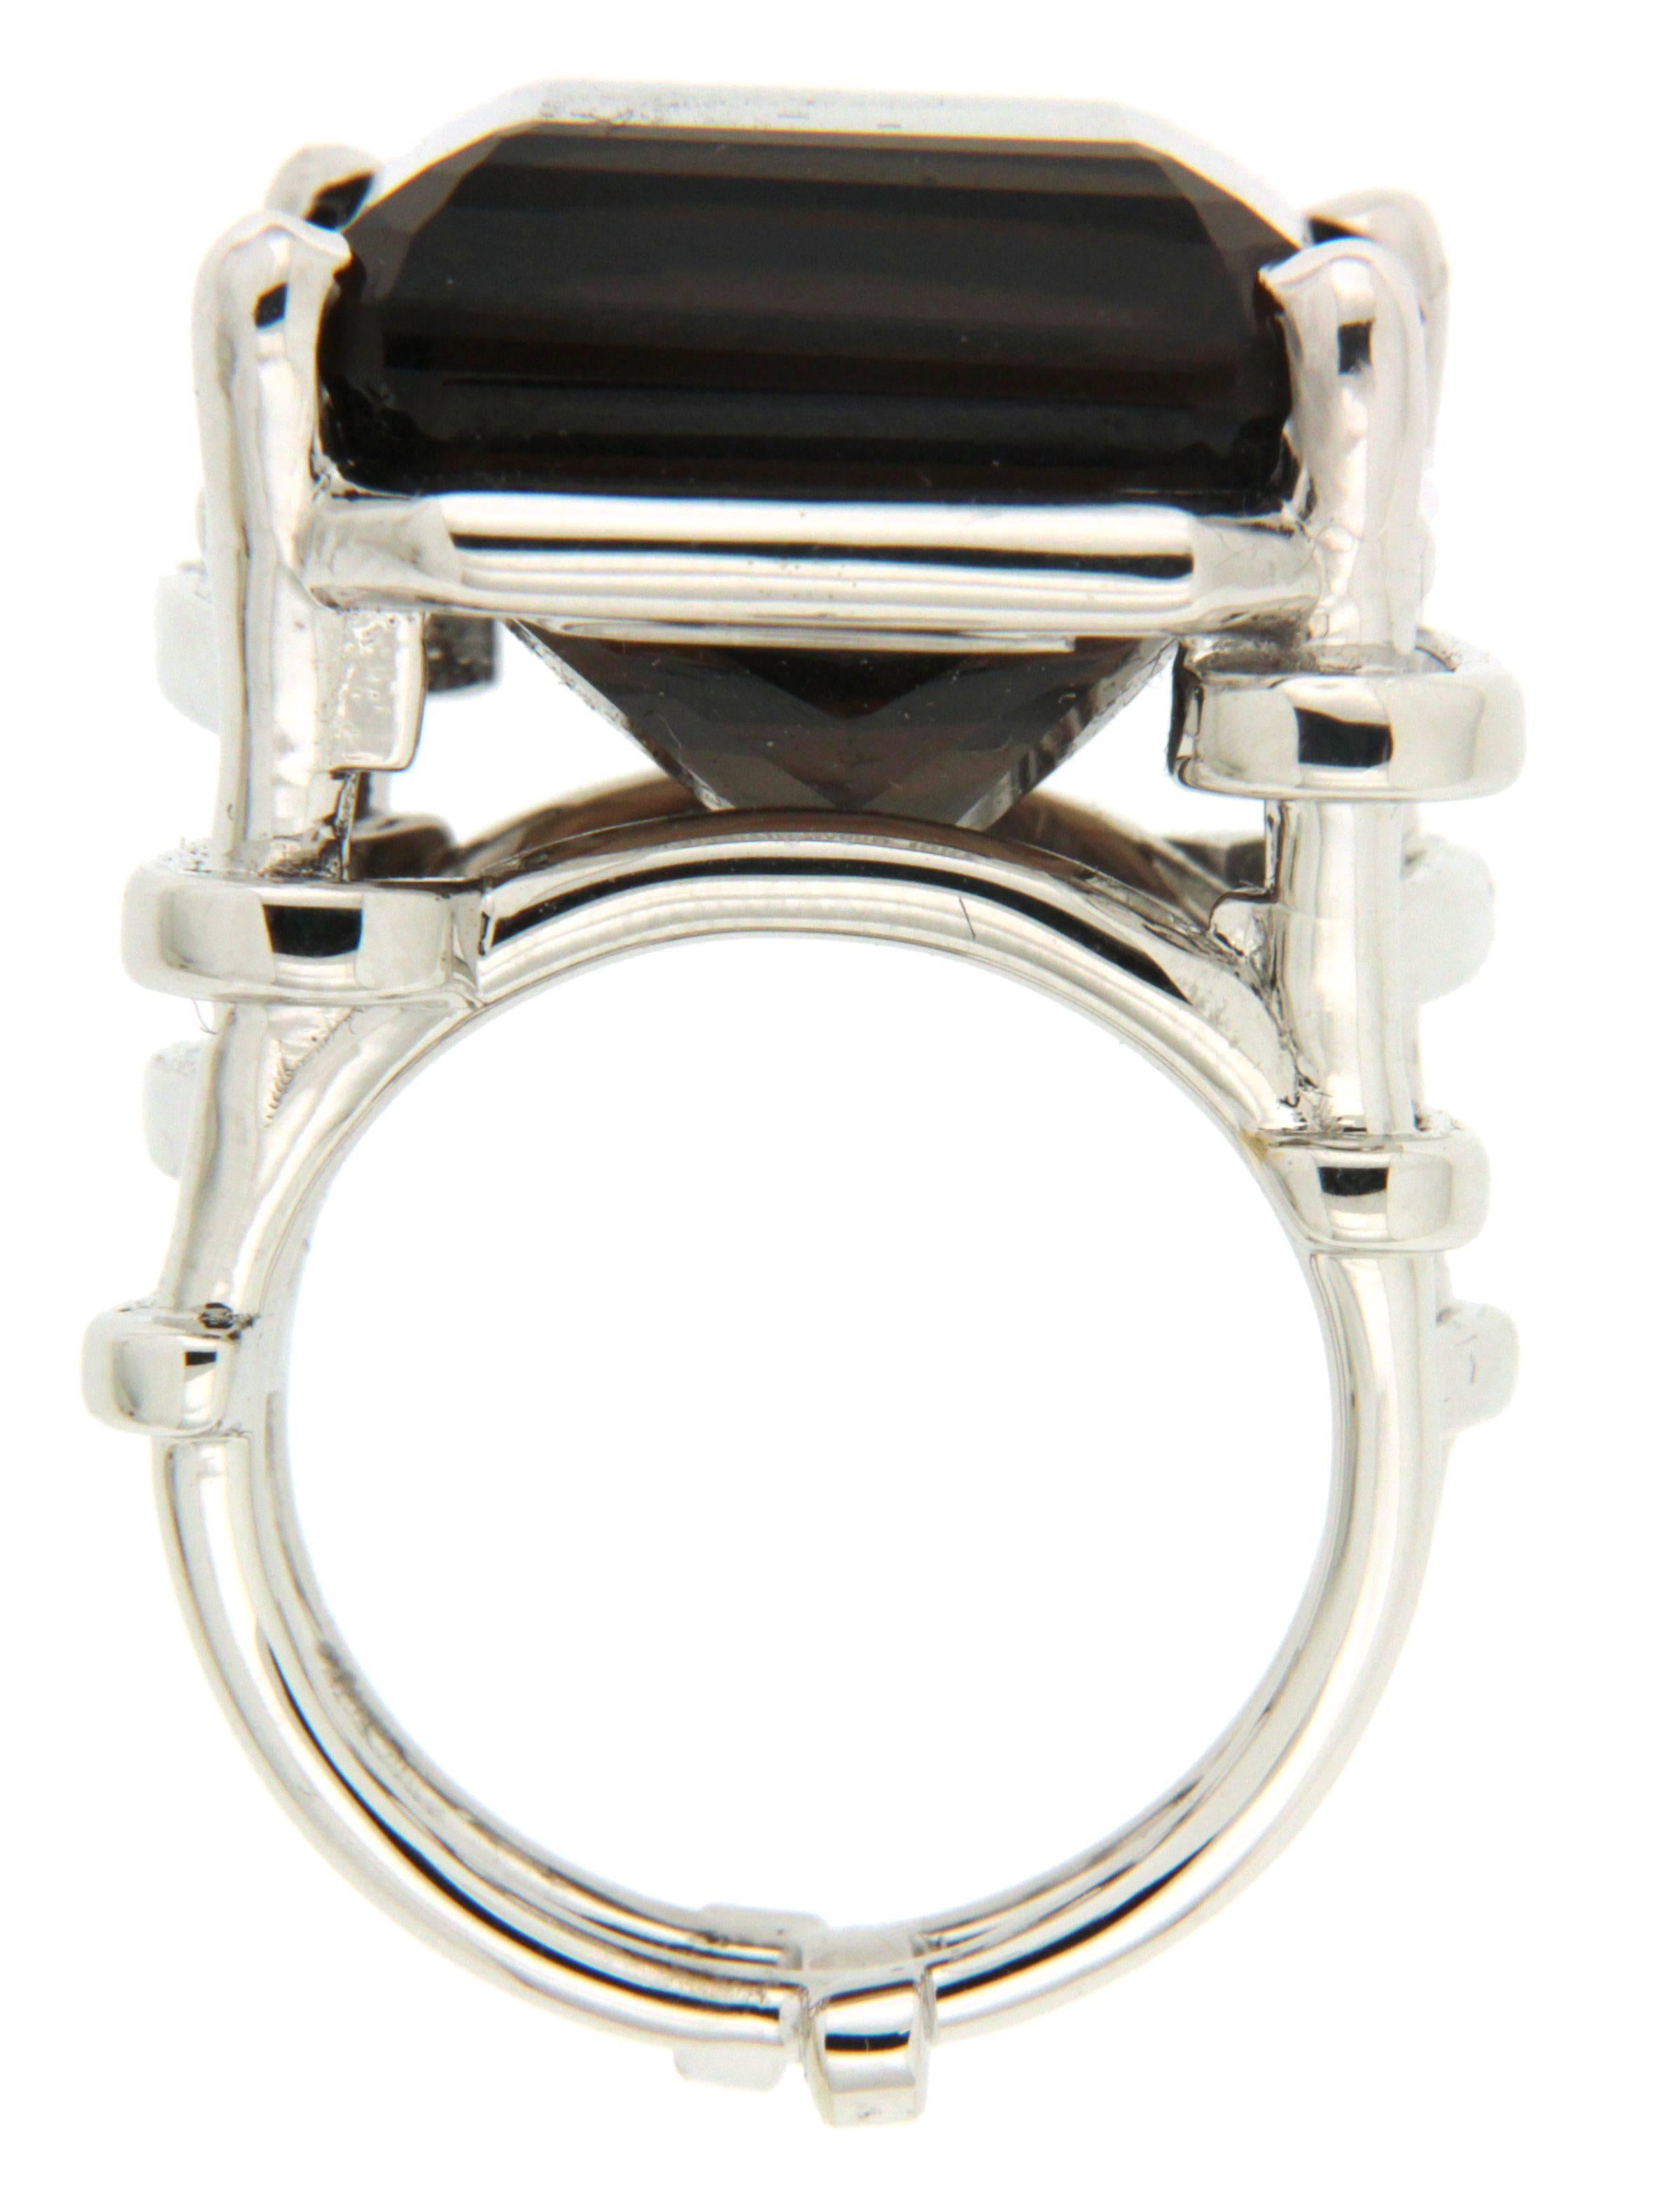 This ring features an Emerald Cut Smokey Topaz of 29.83 ct and is designed with trellis shanks in 18kt white gold.